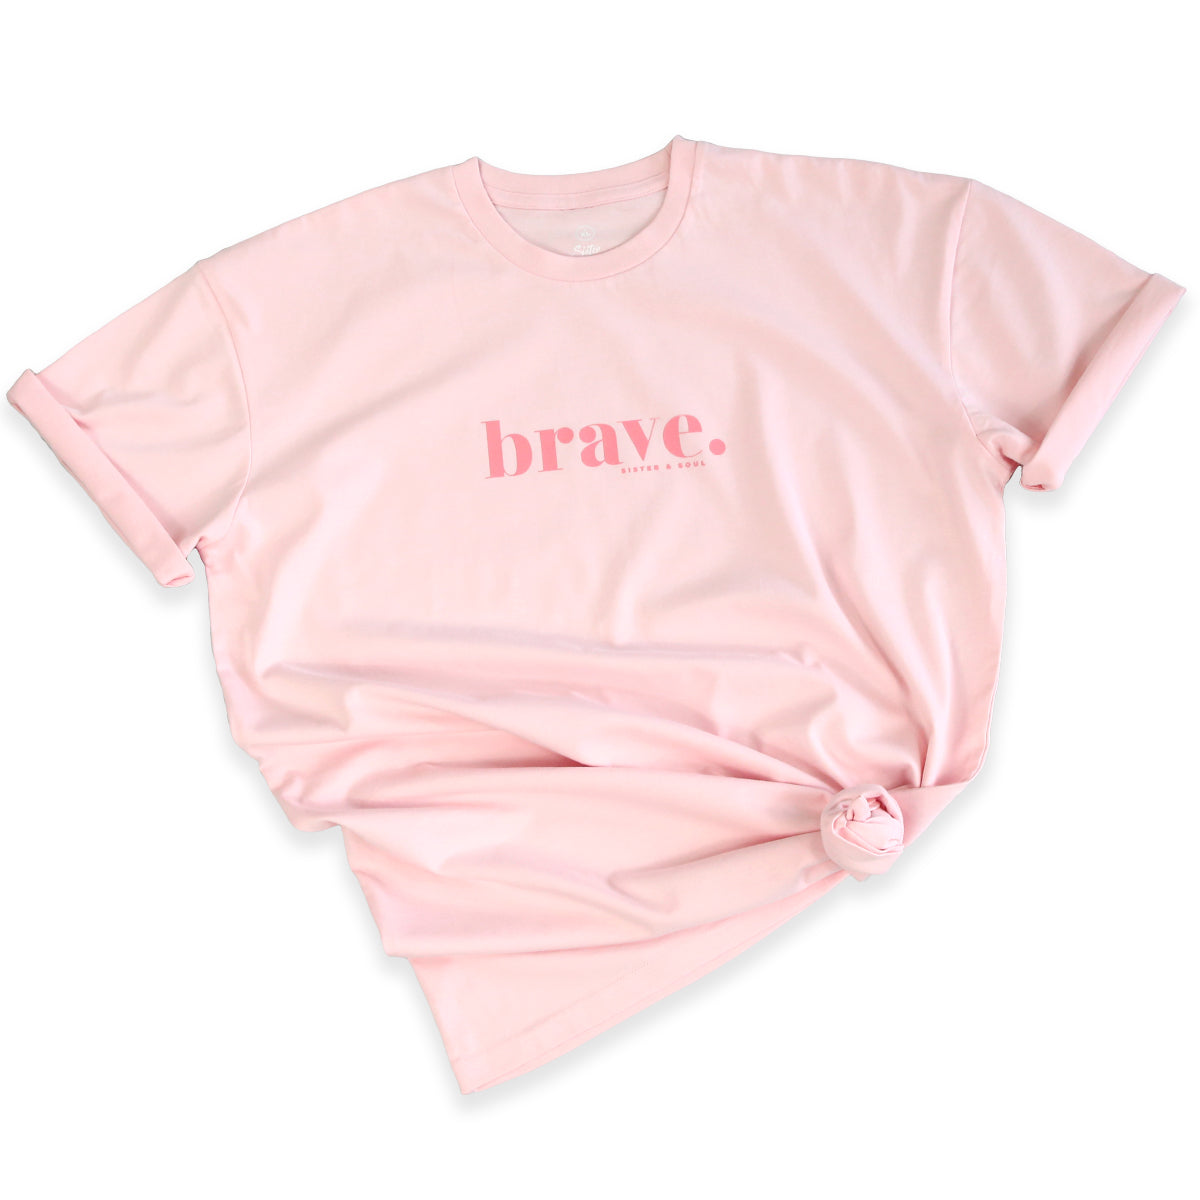 PINK BRAVE Women's Plus Size T-shirt proceeds donated to the National Breast Cancer Foundation